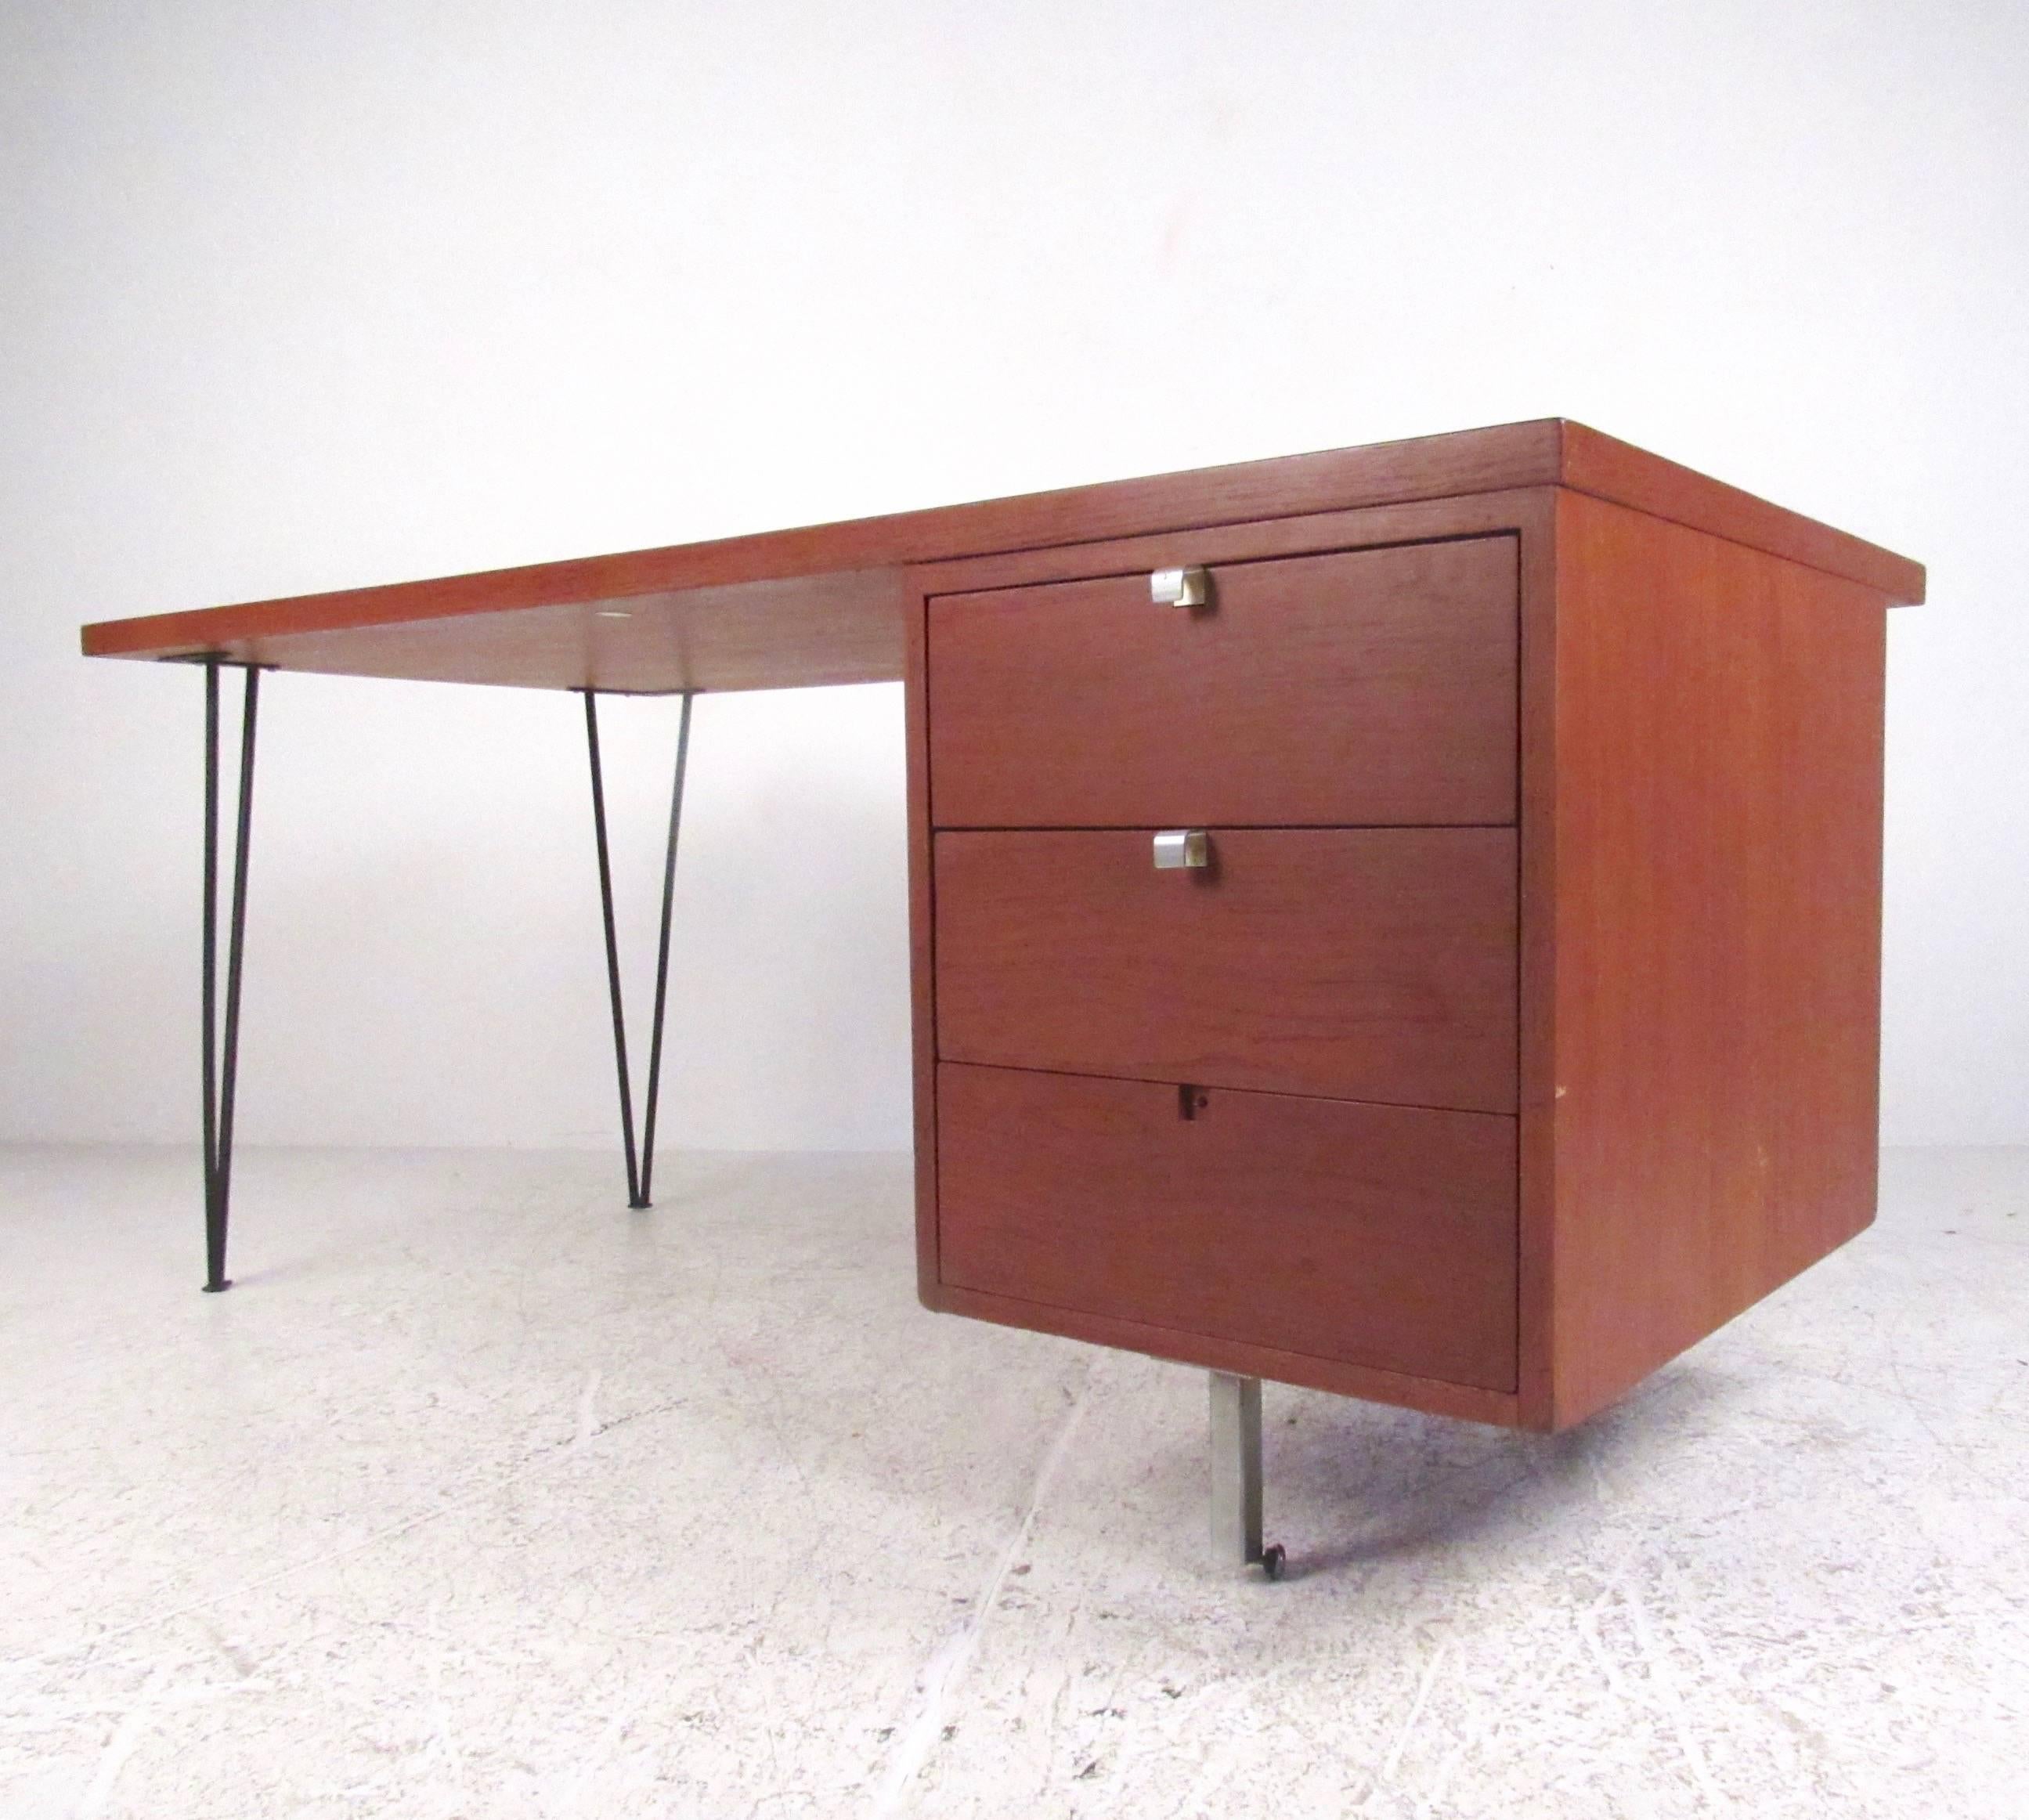 This stylish Mid-Century desk designed by George Nelson for Herman Miller offers three drawers and a spacious hardwood work space ideal for home or business office. This stylish table has been modified with hairpin legs and offers modern design for